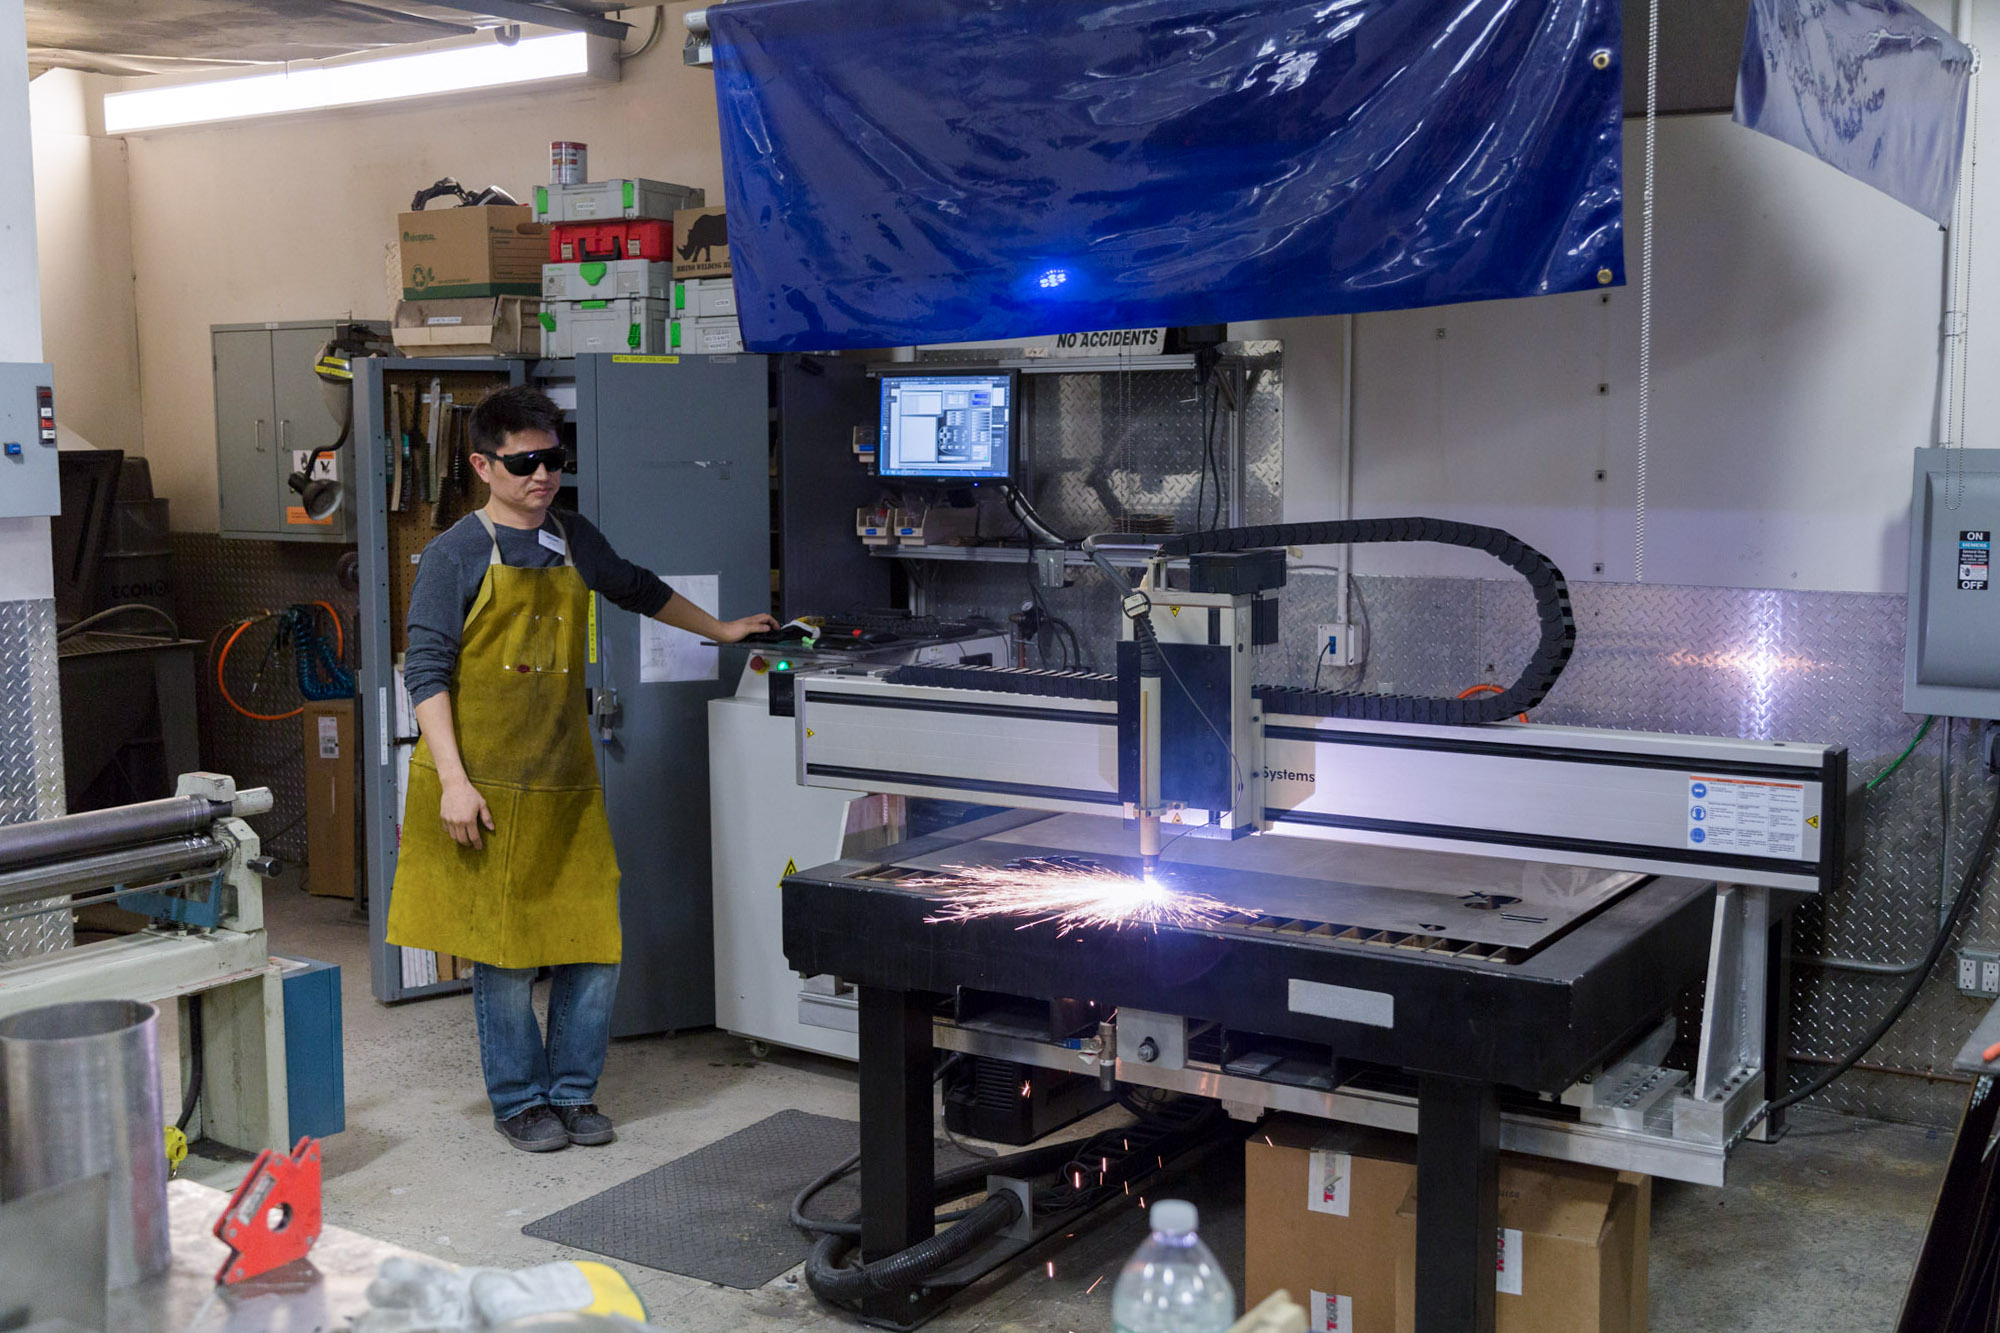 The student supervising the plasma cutting machine in the metal shop while cutting a sheet of metal after a provided design.